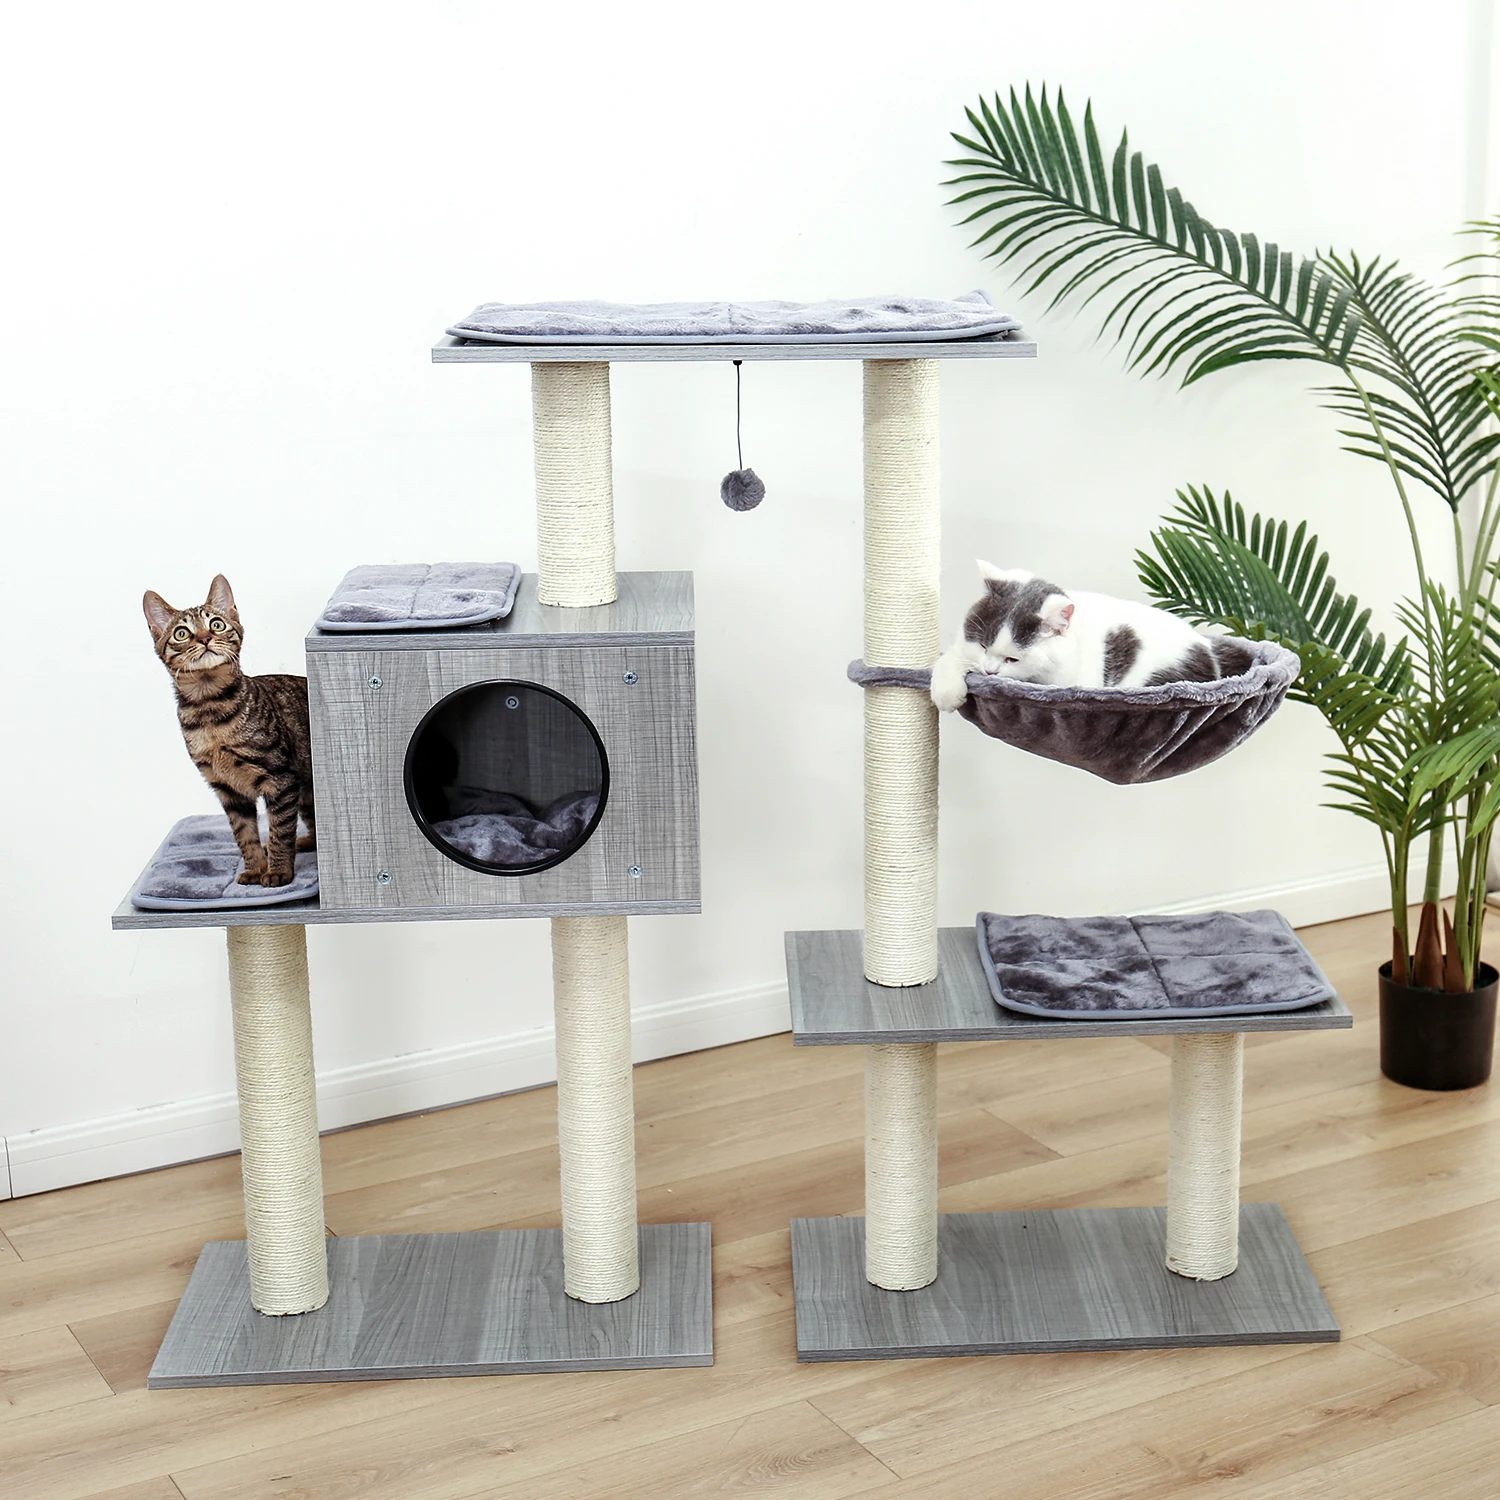 Luxury Cat Tree House Kitten Jumping Natural Scratching Post for Kitten Hanging Ball Multi-Functional Cat Tower Spacious Hammock